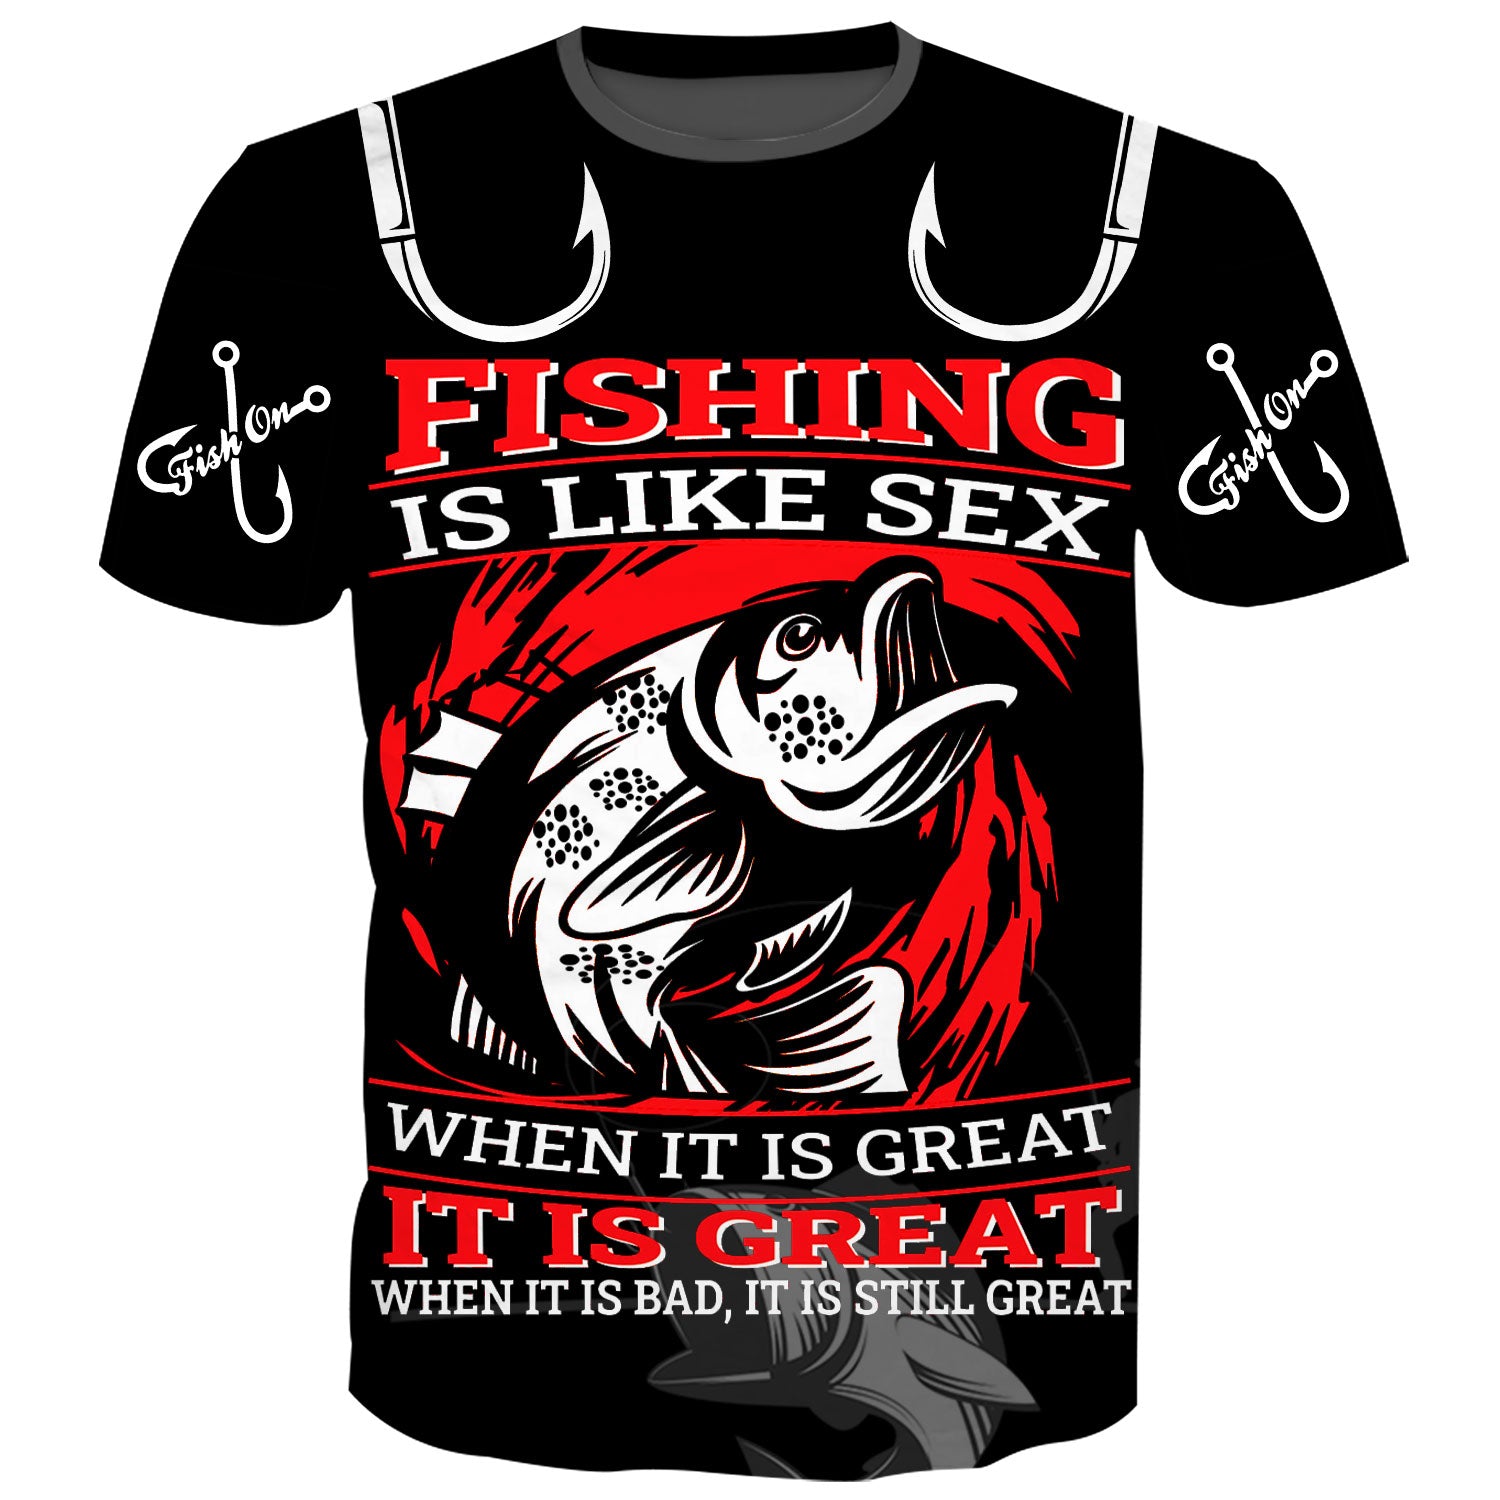 Fishing t-shirt with text "FISHING IS LIKE SEX WHEN IT IS GREAT IT IS GREAT WHEN IT IS BAD IT IS STILL GREAT" and a largemouth bass.